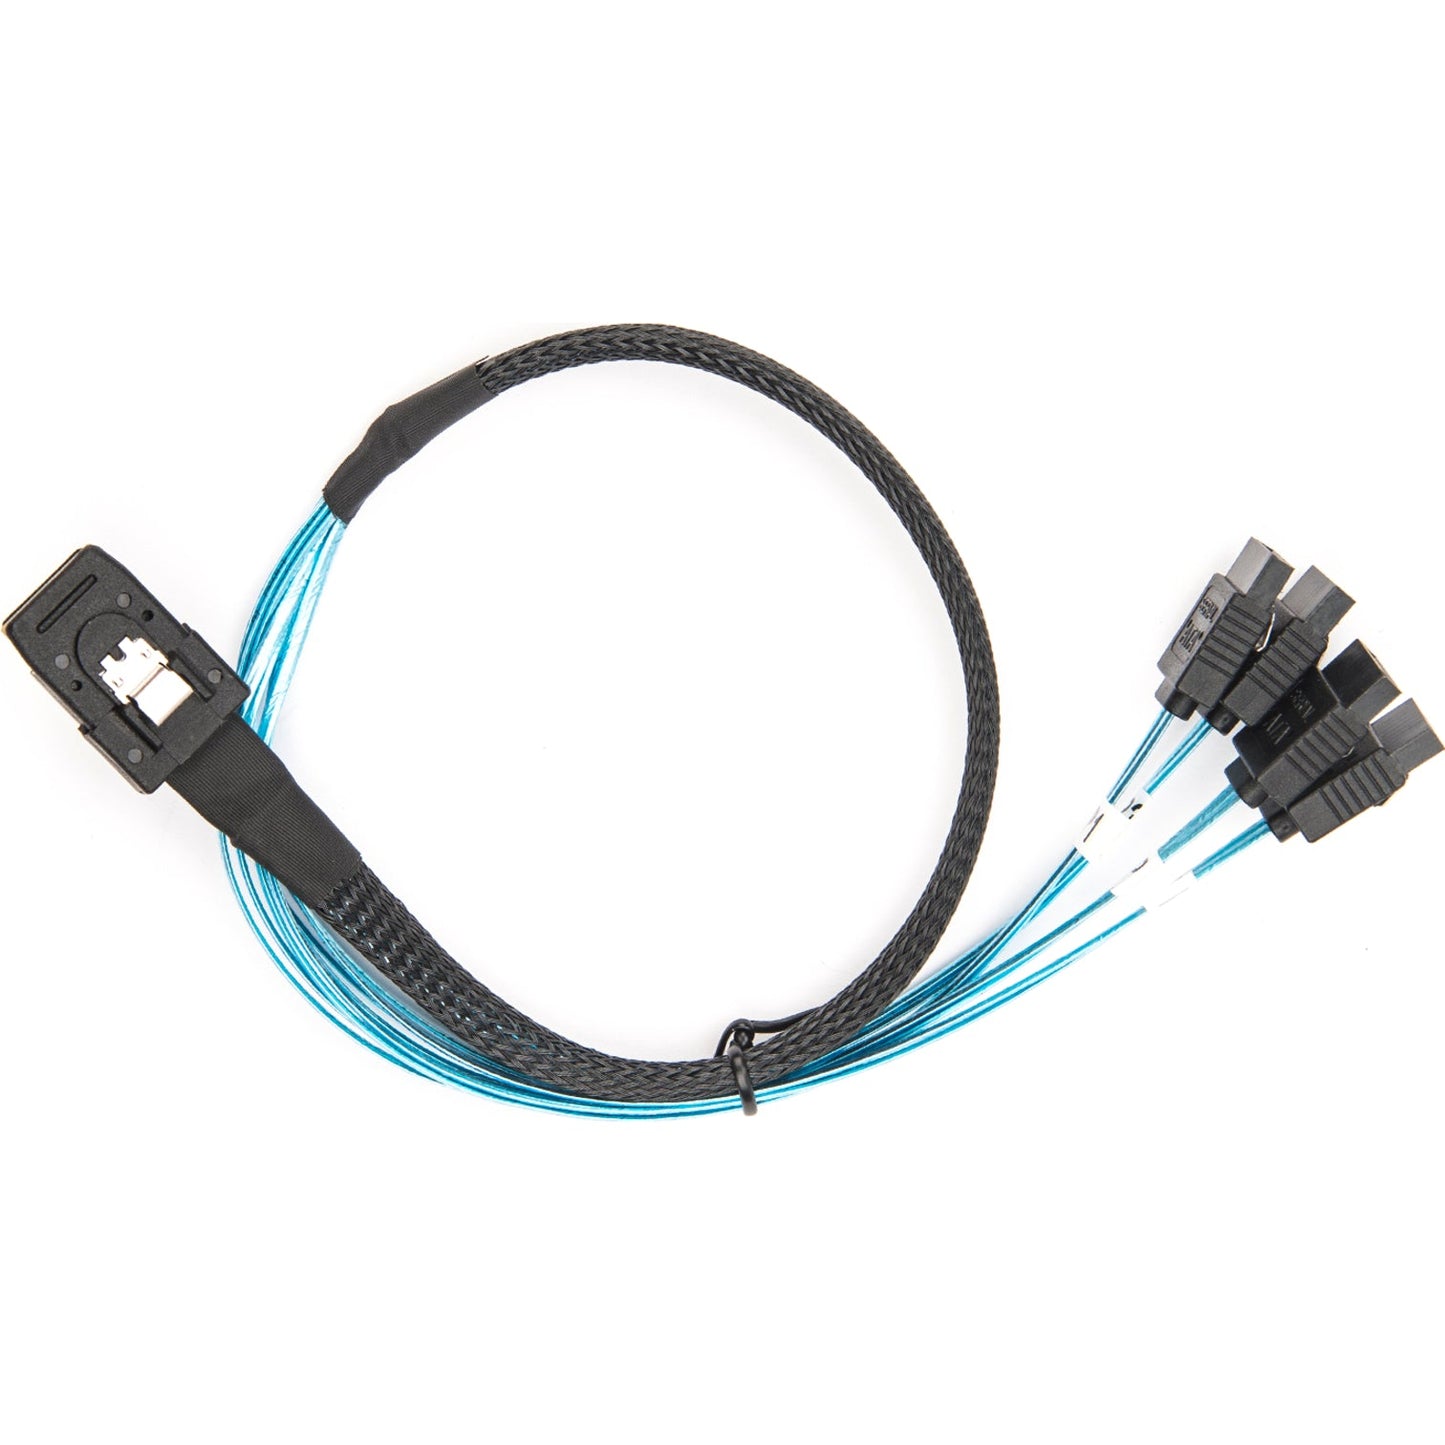 Rocstor Premium 20in Serial Attached SCSI SAS Cable - SFF-8087 to 4x Latching SATA - SAS/SATA for Hard Drive - 20in / 50cm - 1 Pack - SFF-8087 Male SAS - Male SATA - Blue SFF-8087 TO 4X SATA Cable